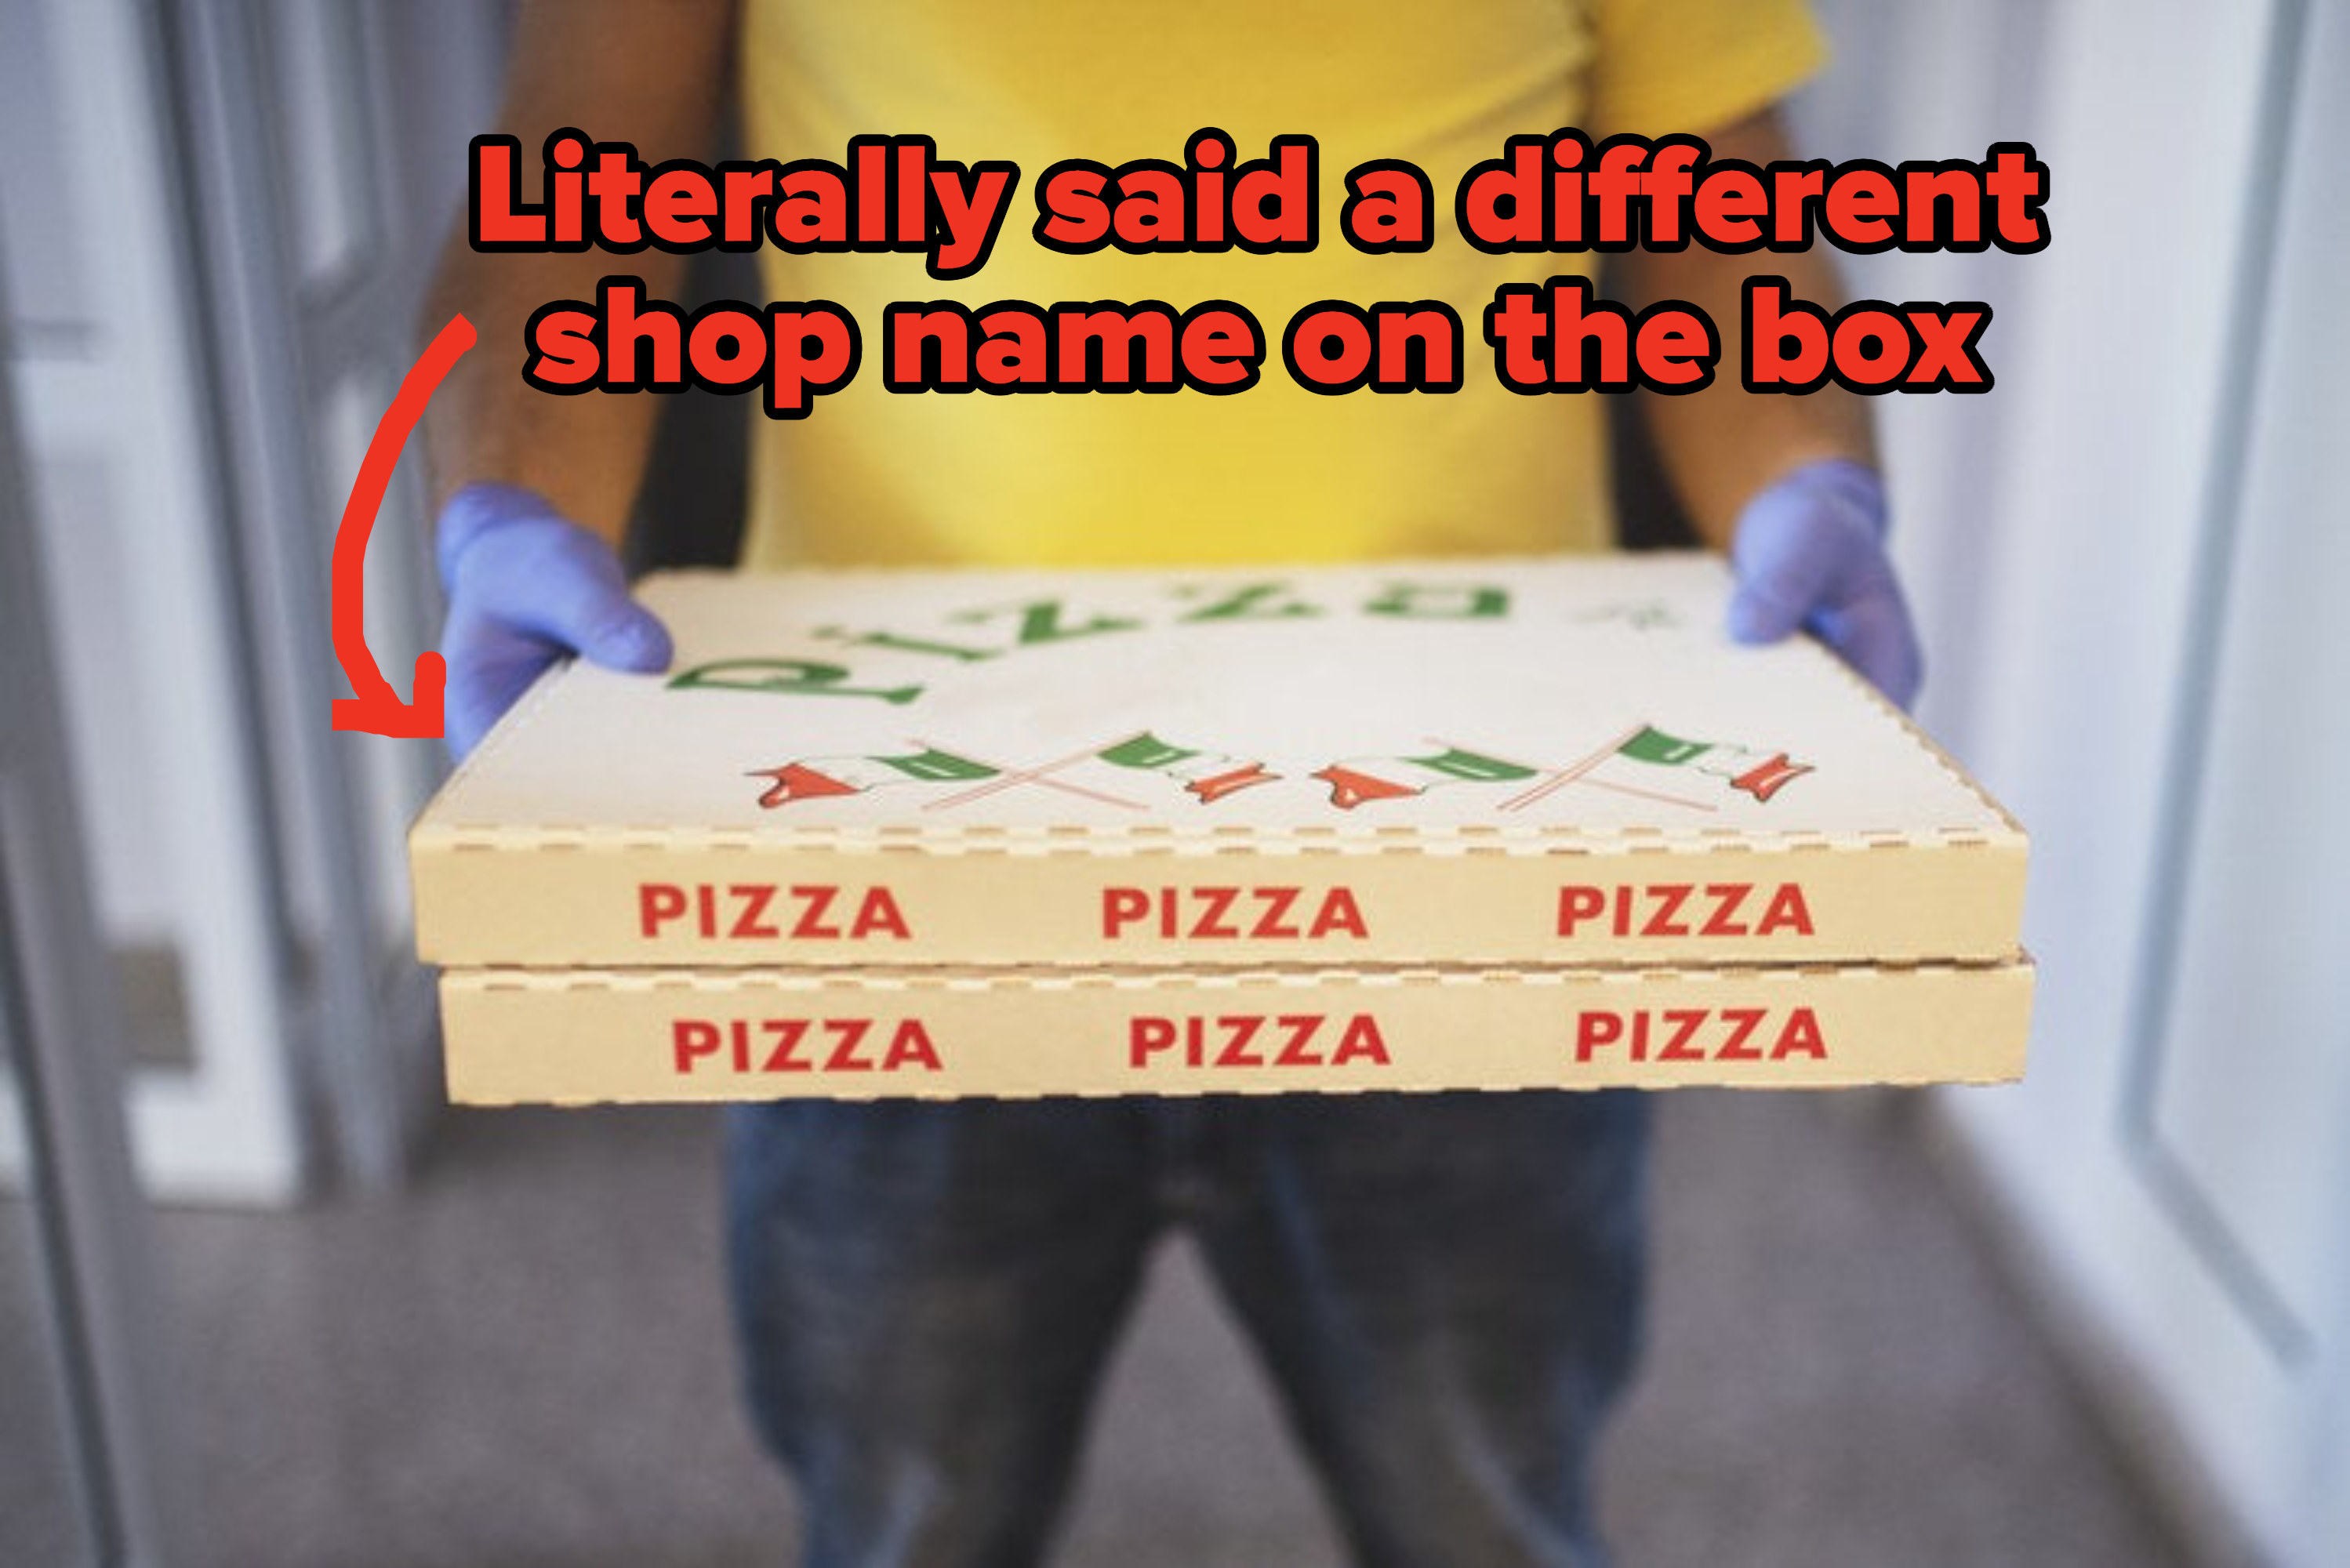 a man with safety gloves and face mask delivers pizza to the designated location with the text &quot;Literally said a different shop name on the box&quot;